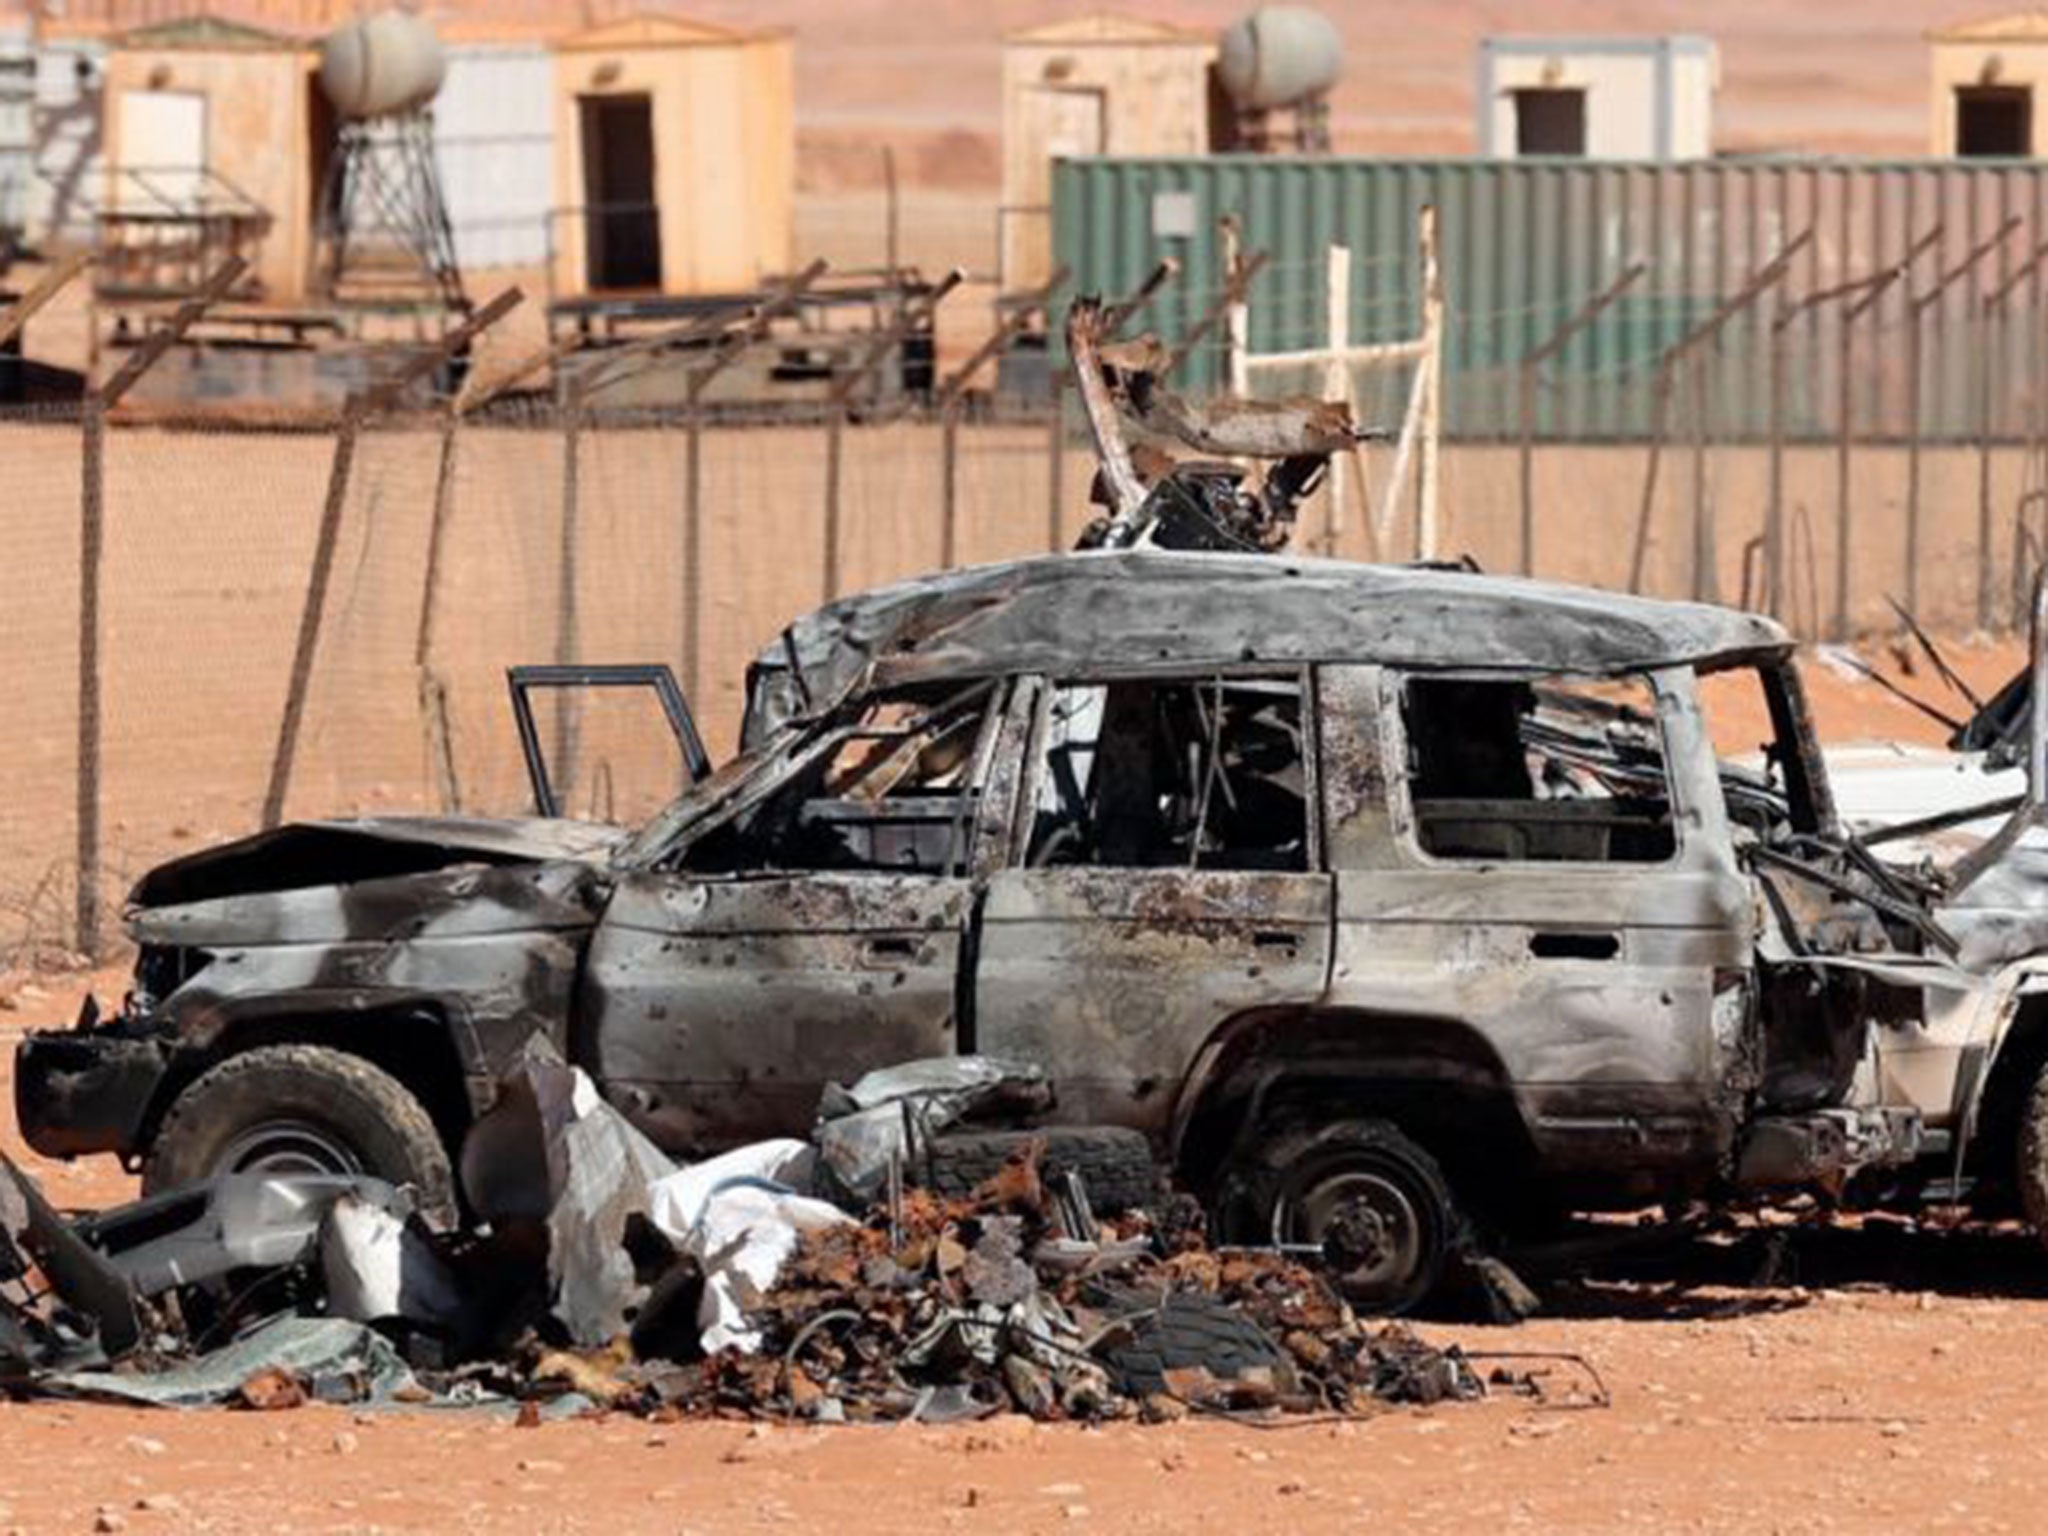 Seven British hostages died during a four-day siege at the In Amenas complex in 2013 in Algeria